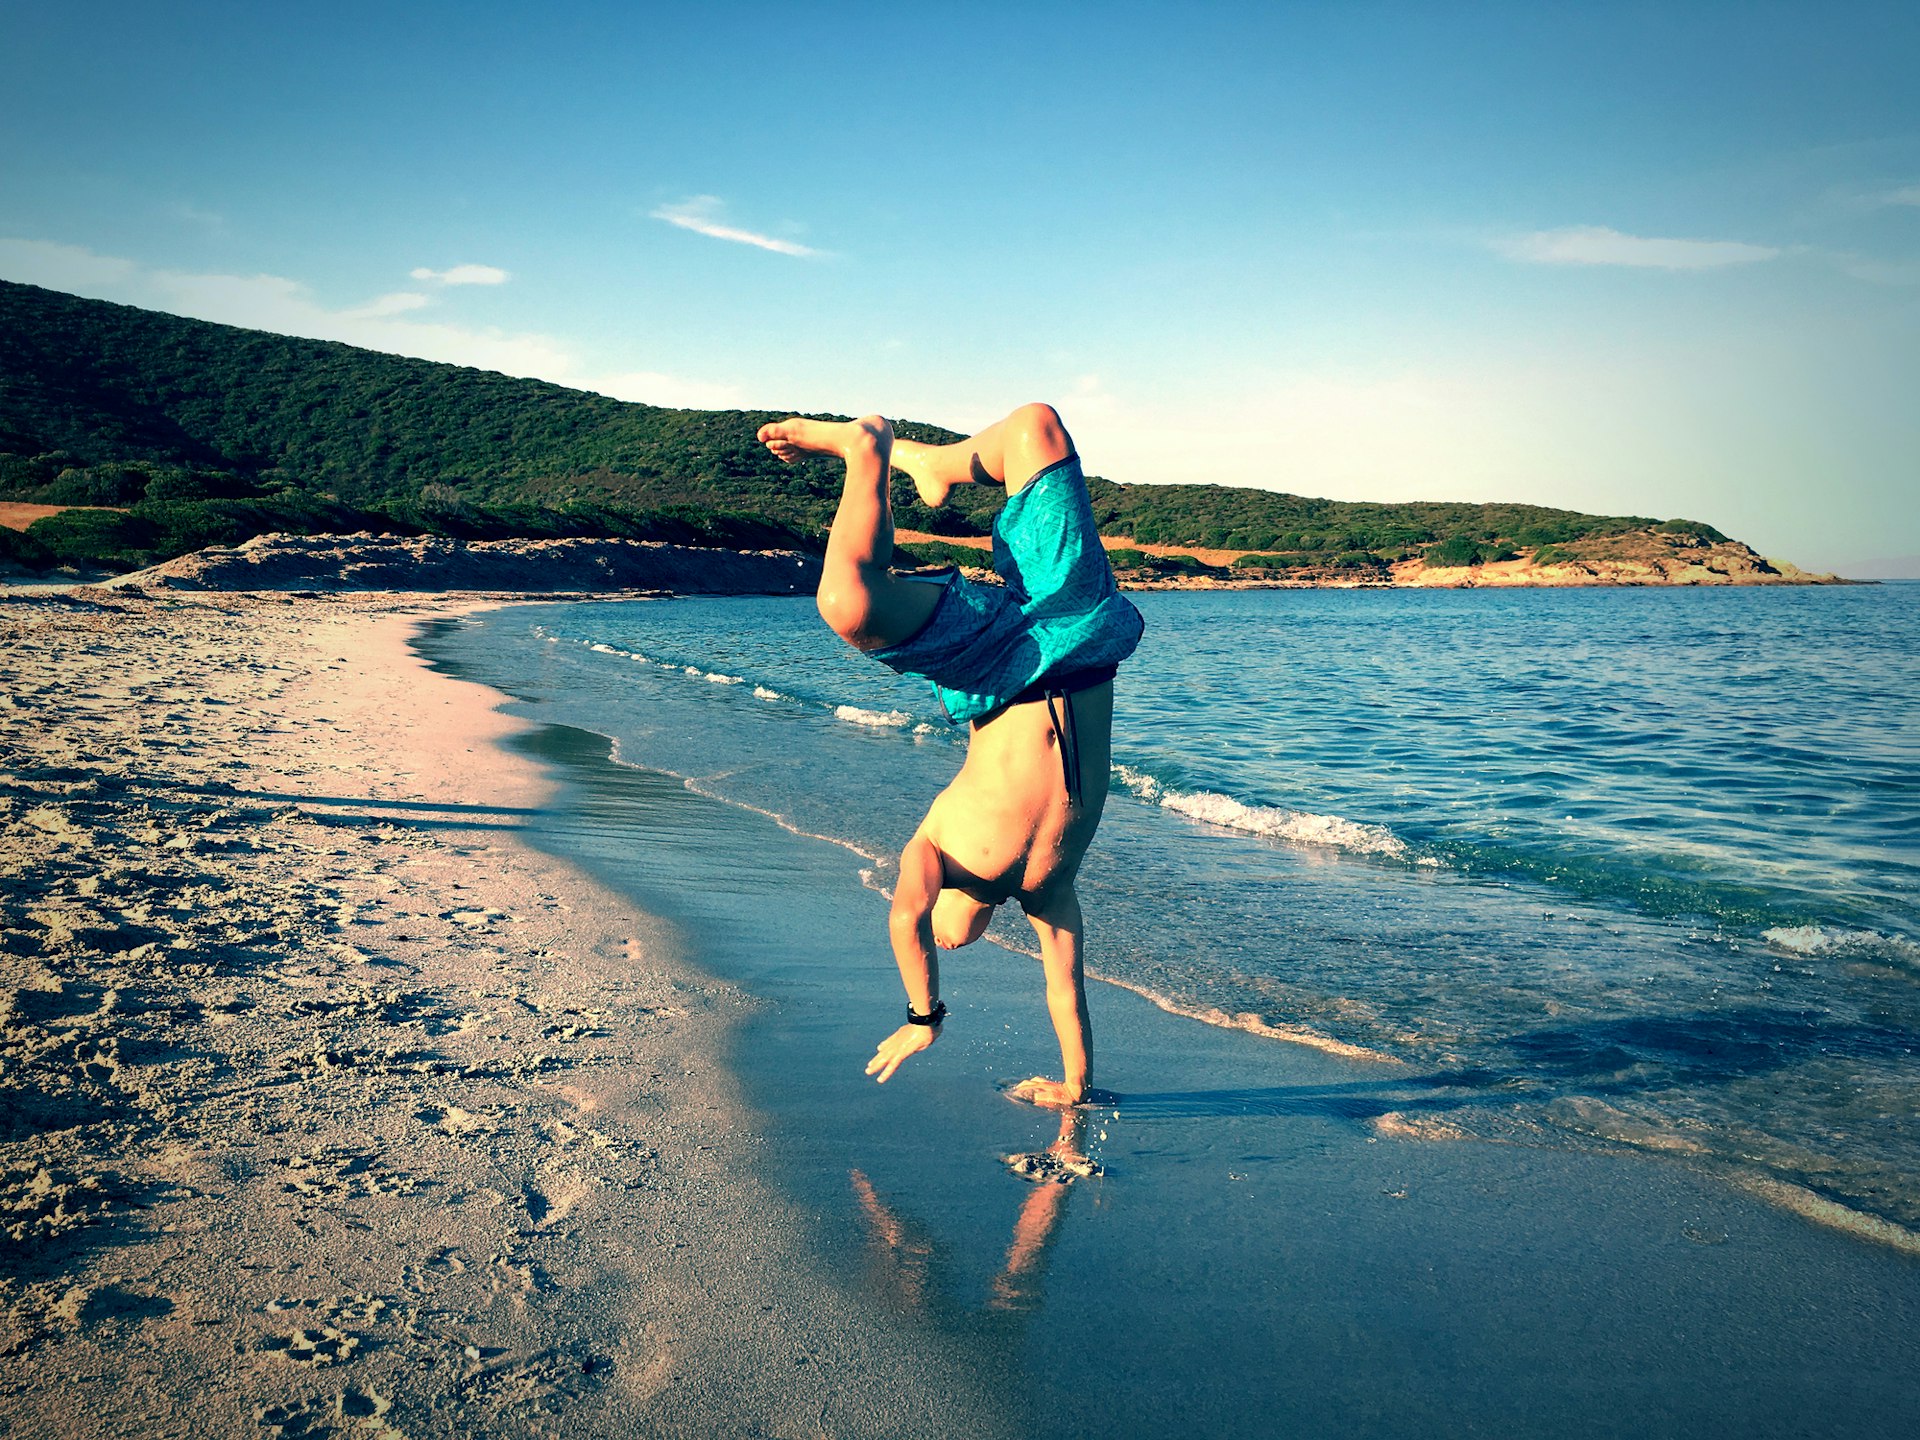 A young boy does a handstand on the beach in Corsica